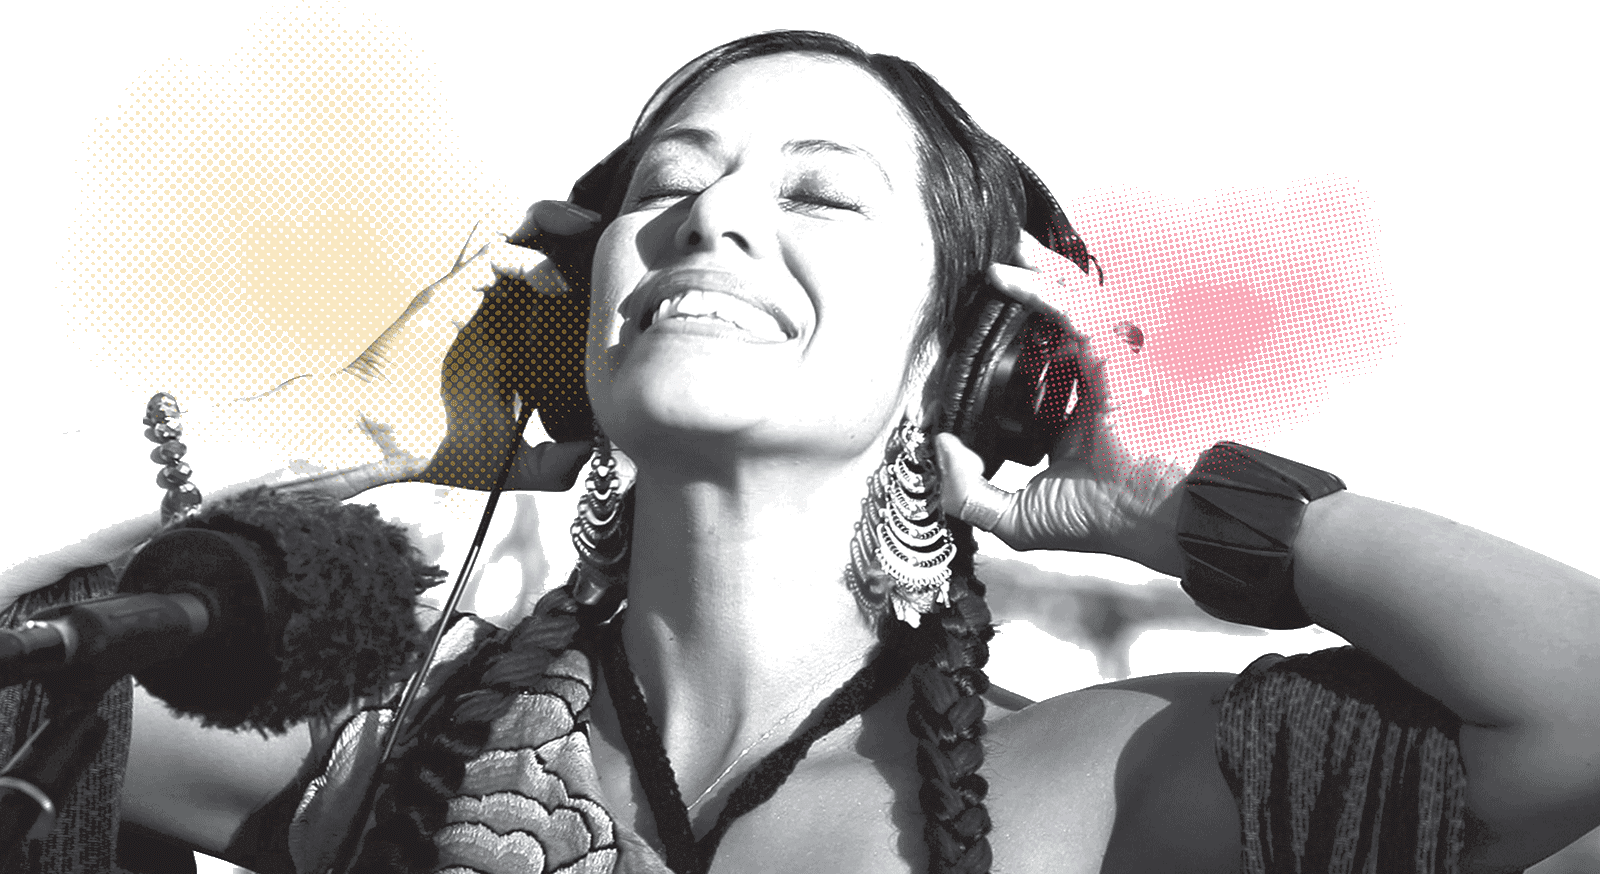 A woman smiling listening to music through headphones.